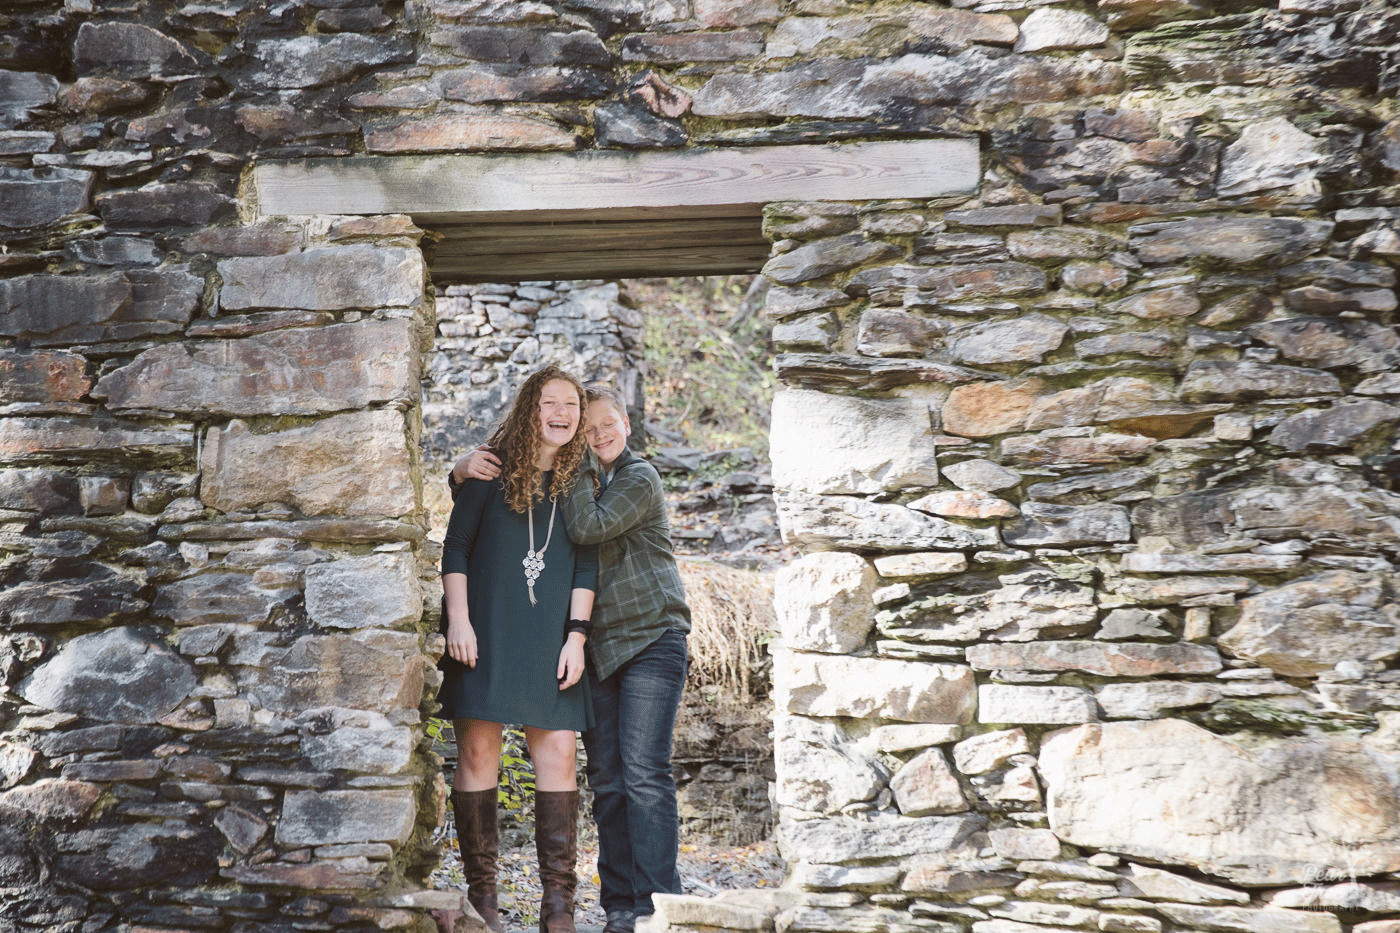 Teenage brother and sister being silly and standing together in Paper Mill ruins doorway at Sope Creek in East Cobb.